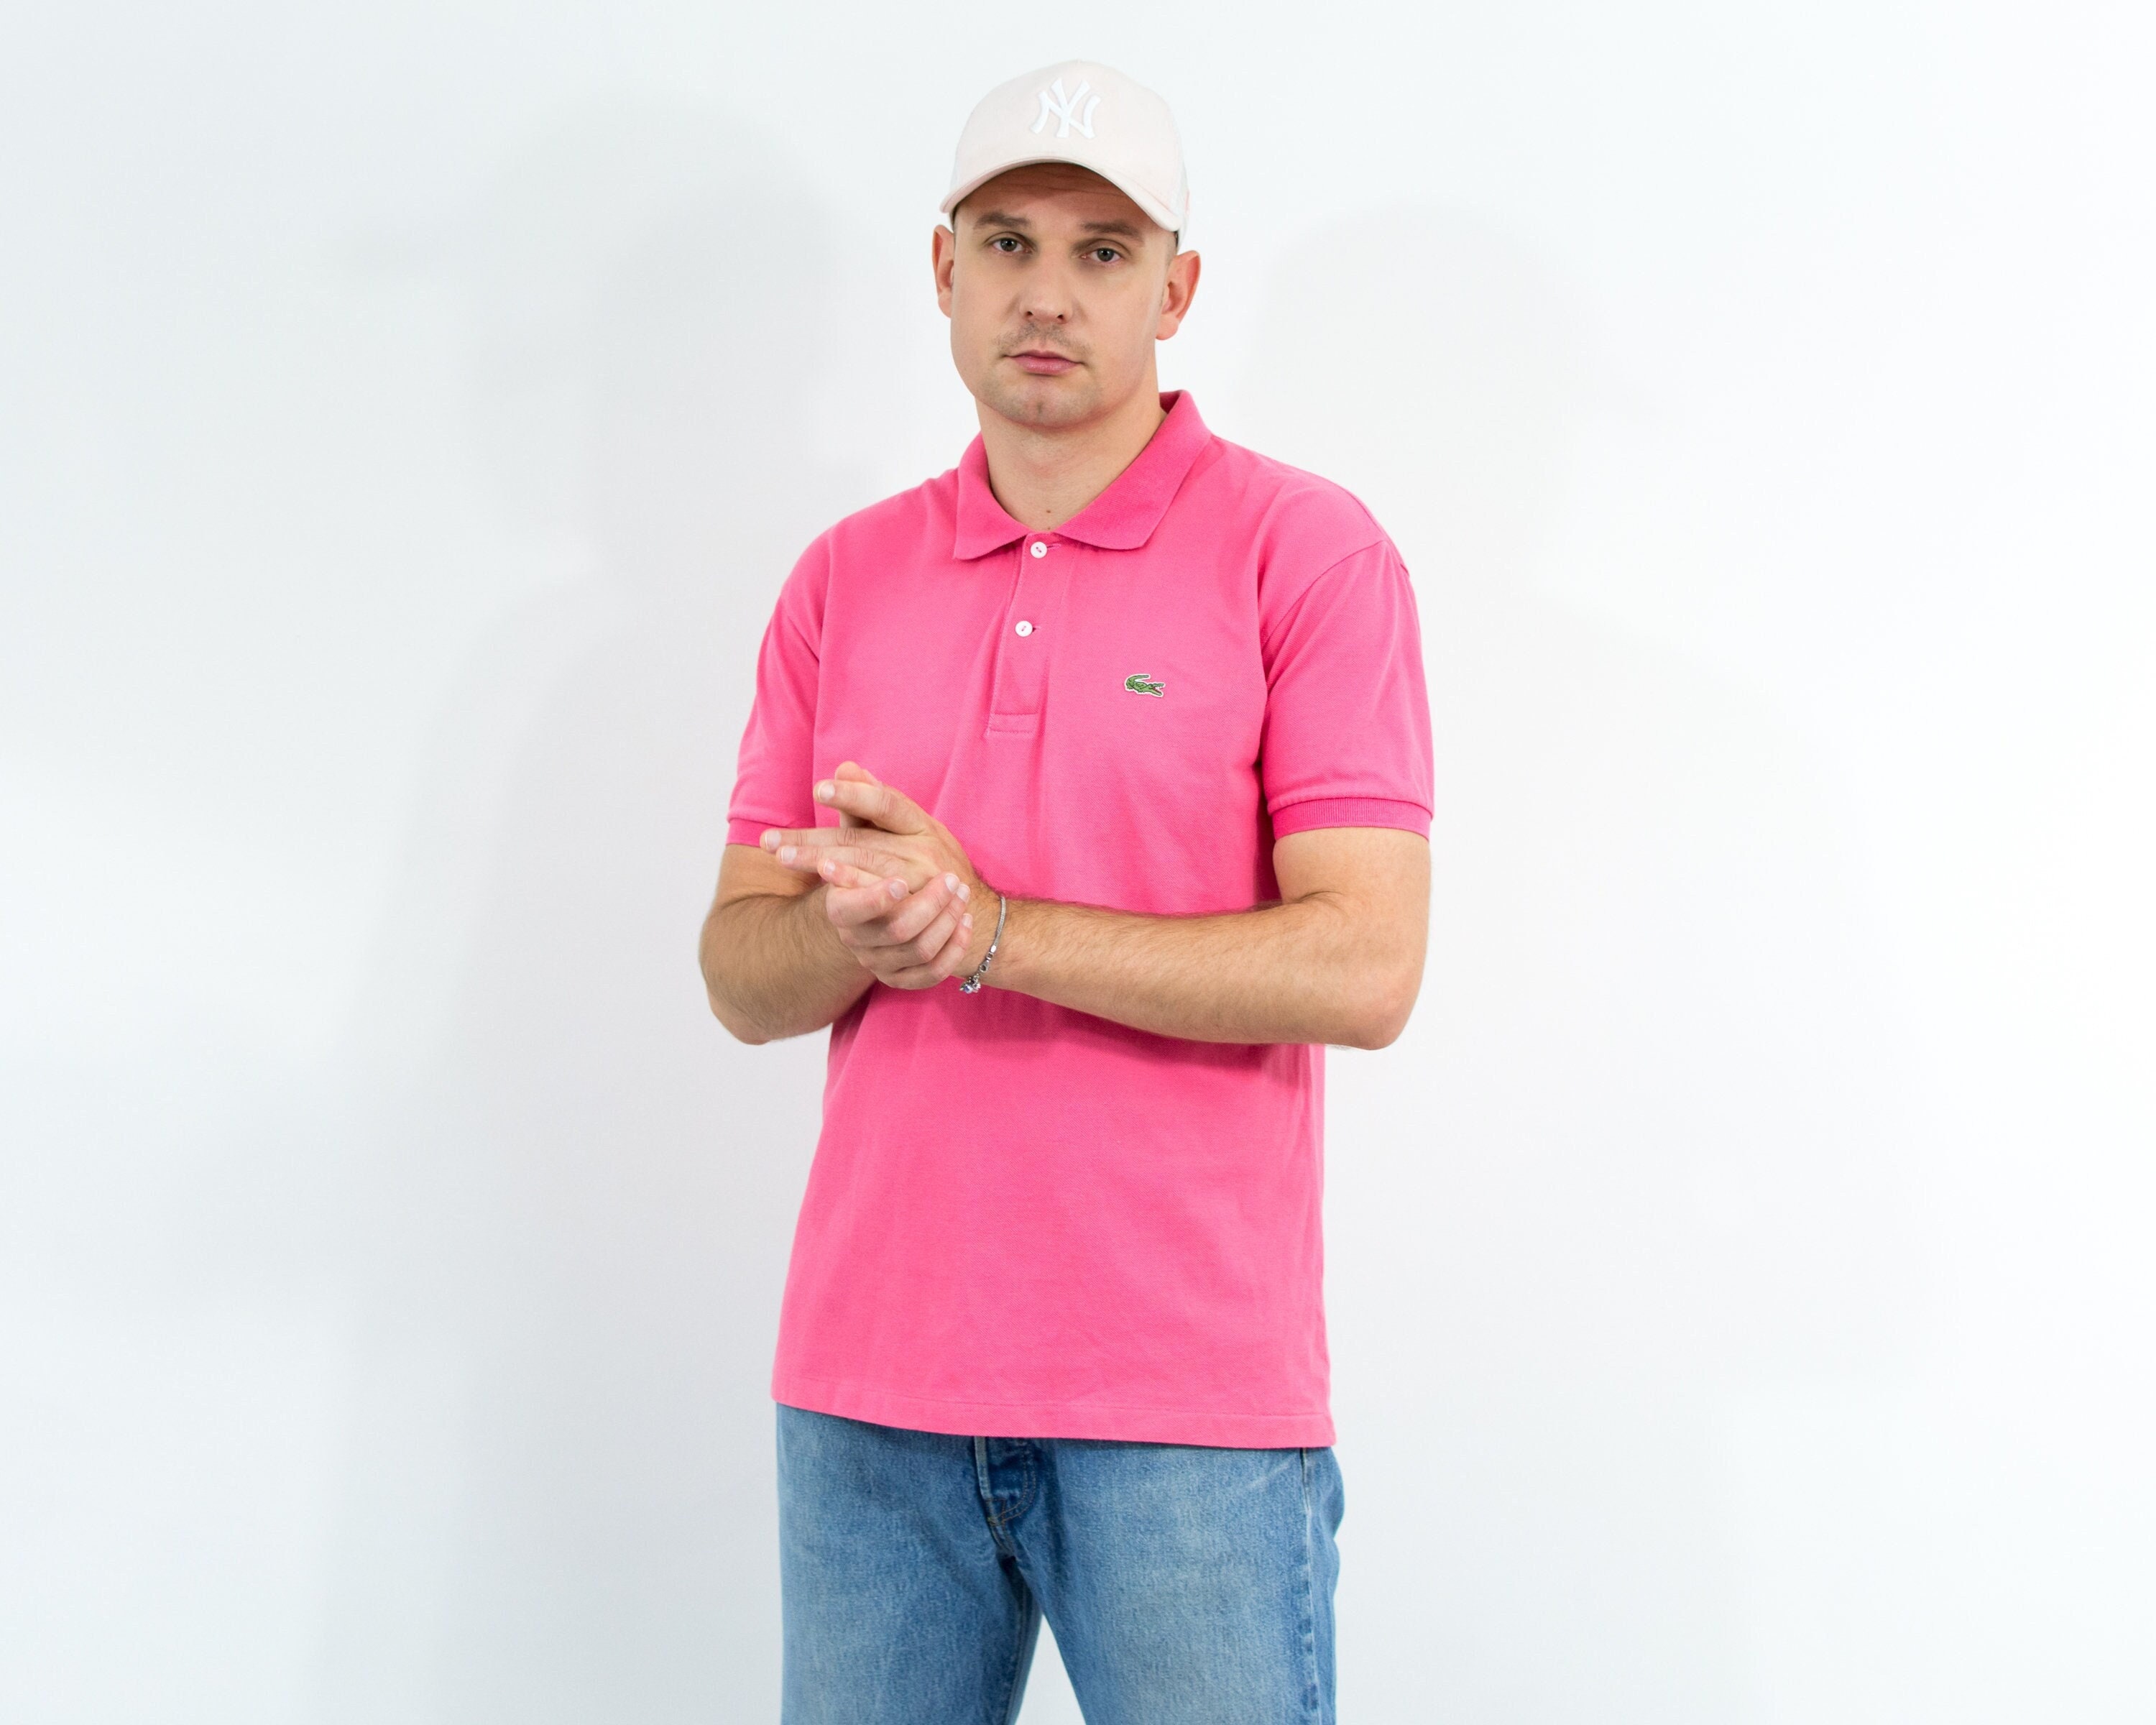 Lacoste Polo Pink Collared Top Men - Etsy